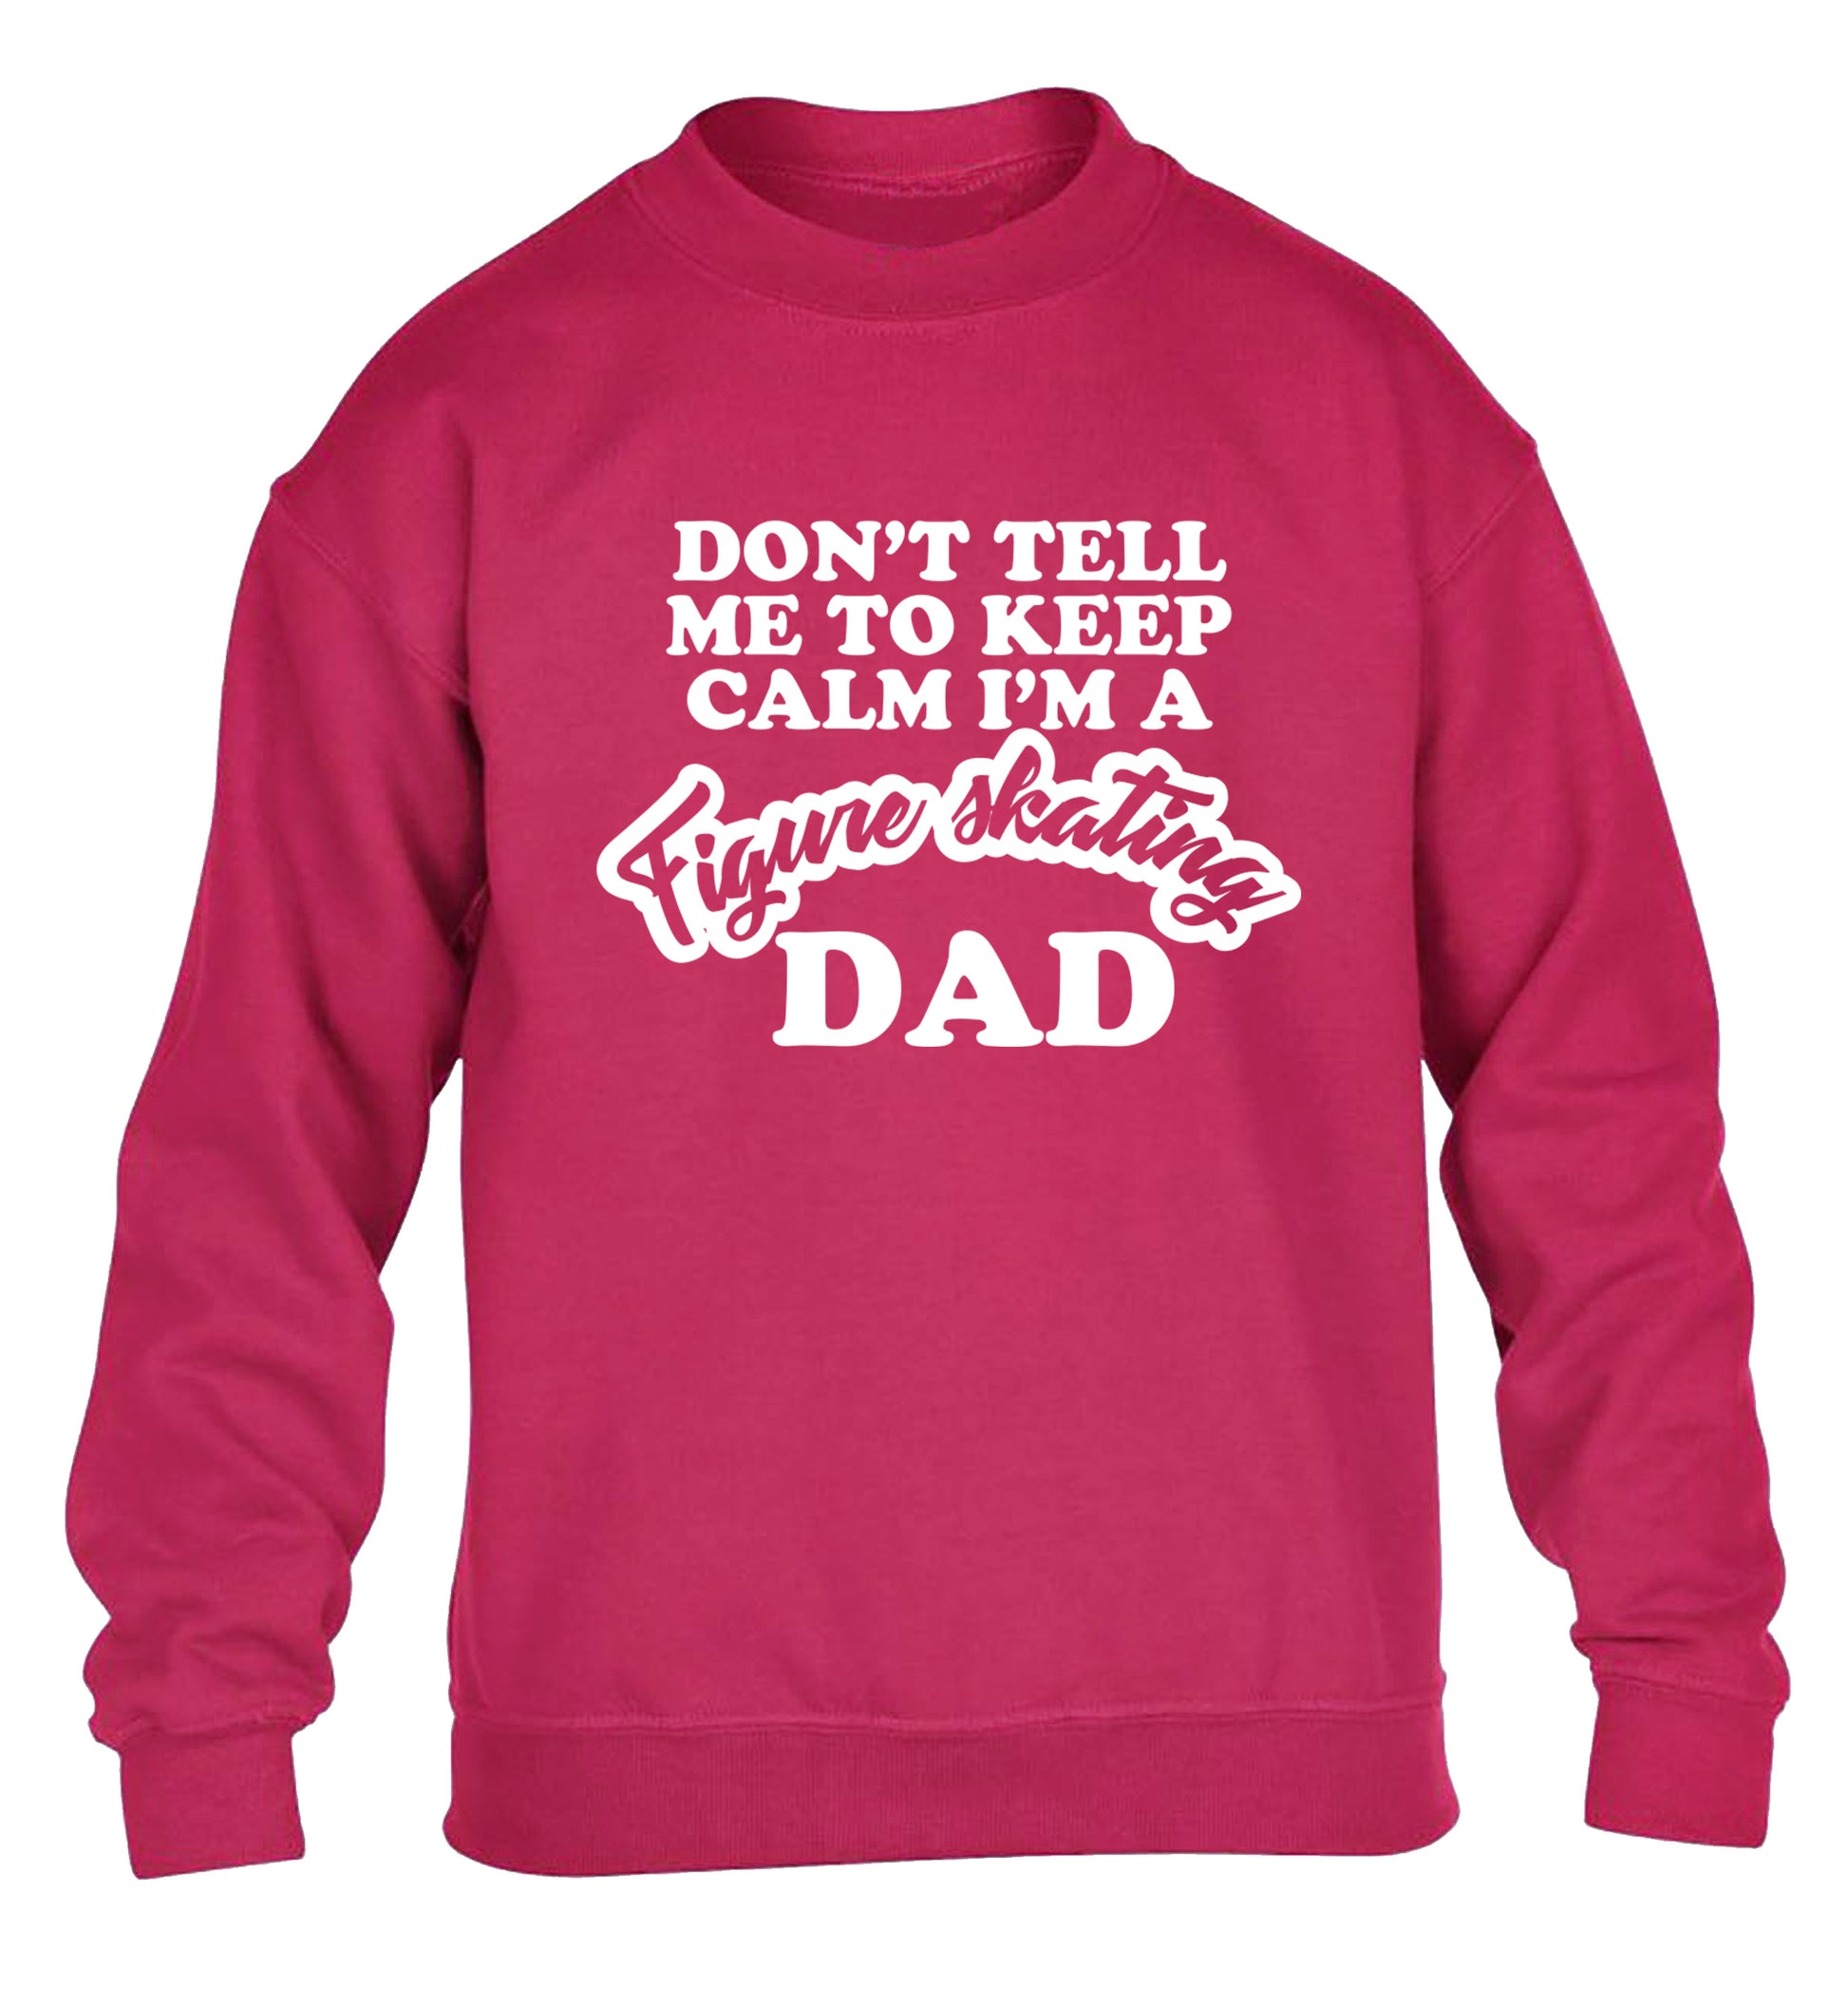 Don't tell me to keep calm I'm a figure skating dad children's pink sweater 12-14 Years